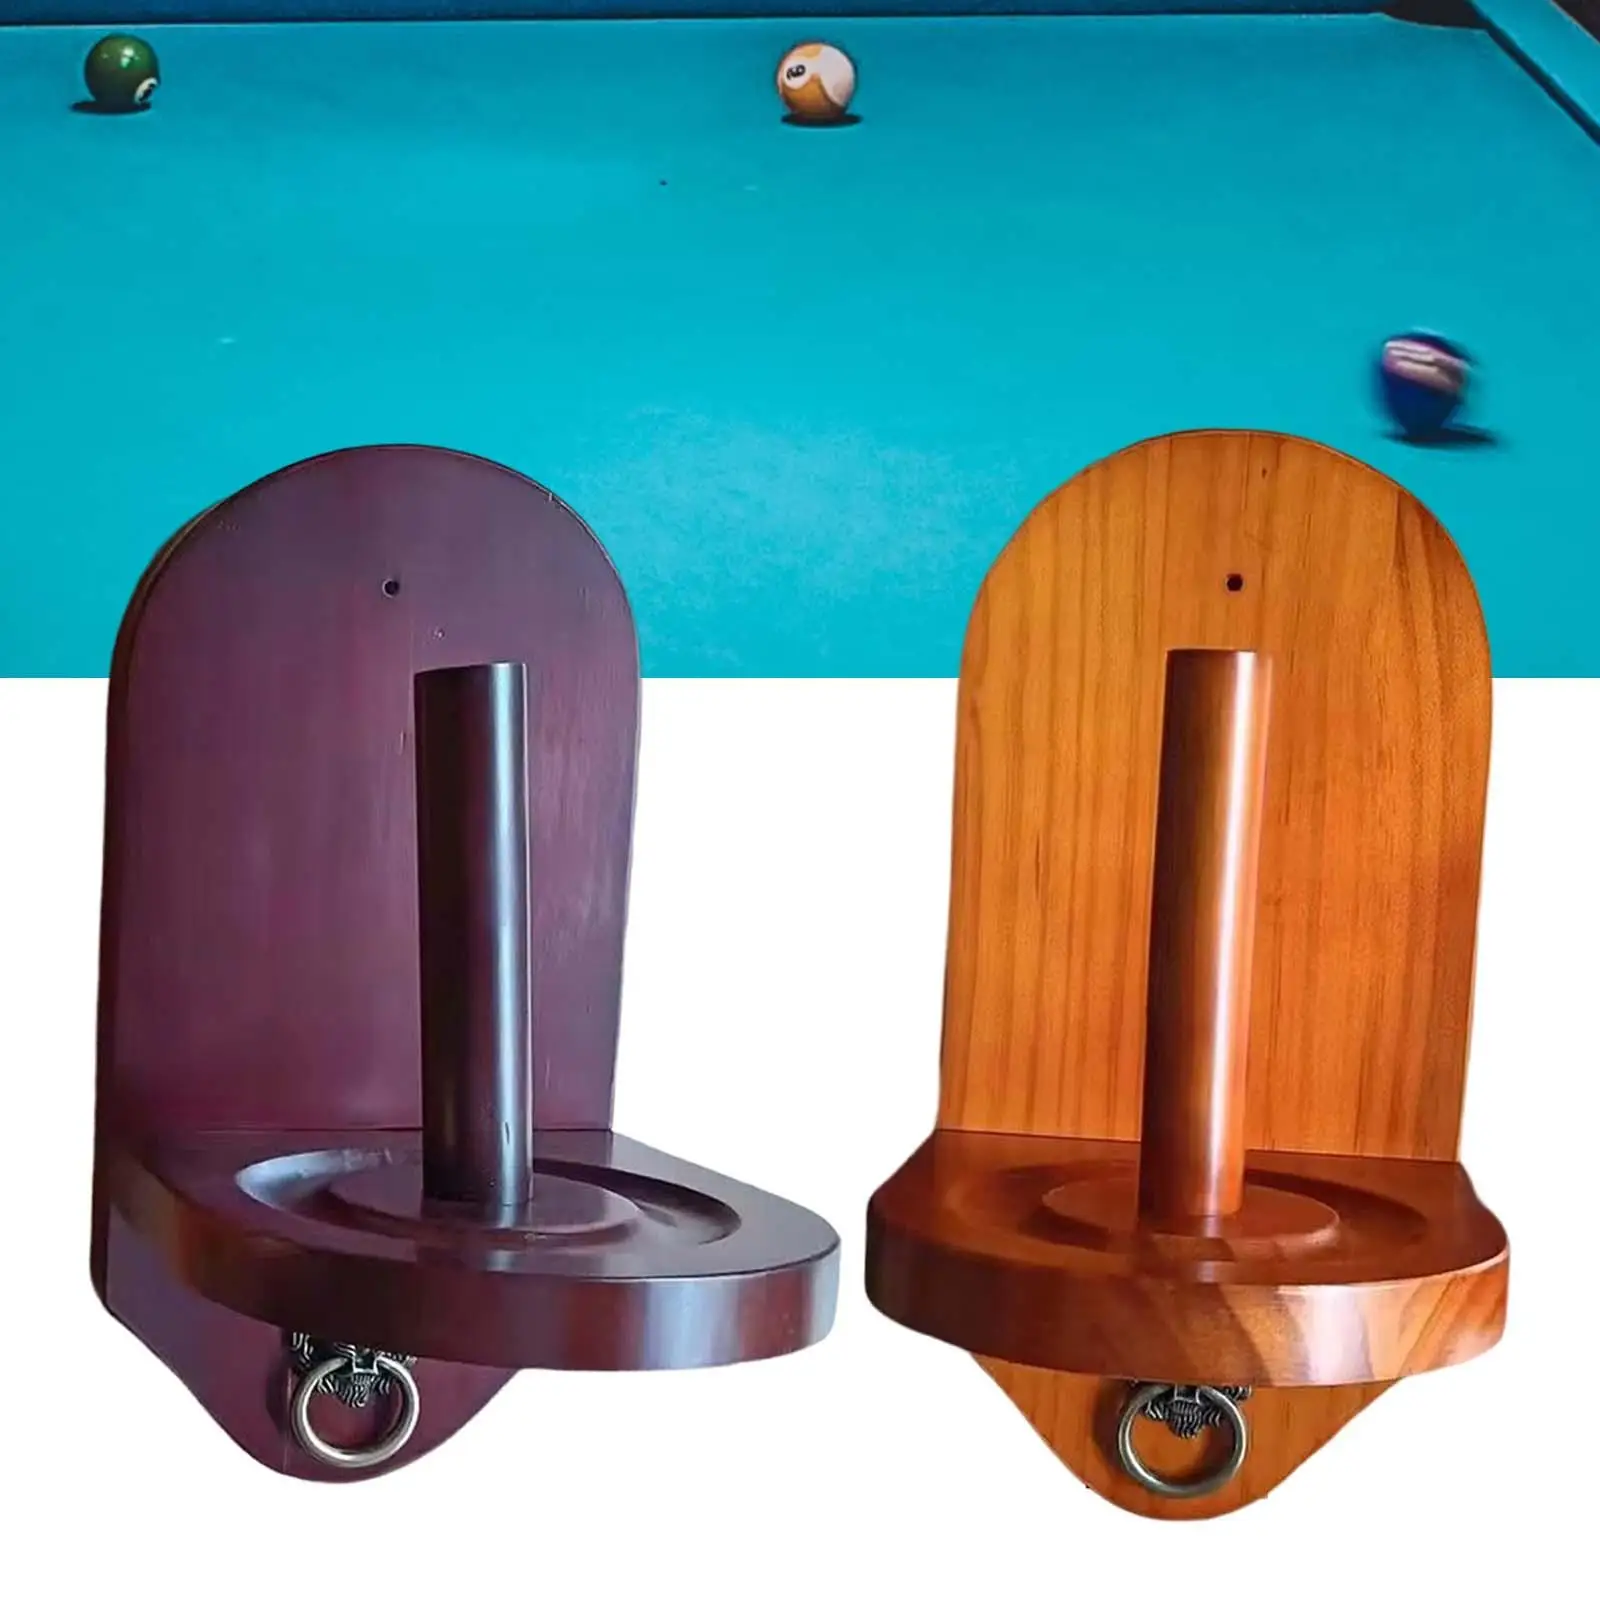 Wooden Cone Chalk Holder Wall Mount Pool Hand Chalk Holder for Billiards Pool Table Game Accessory Supplies